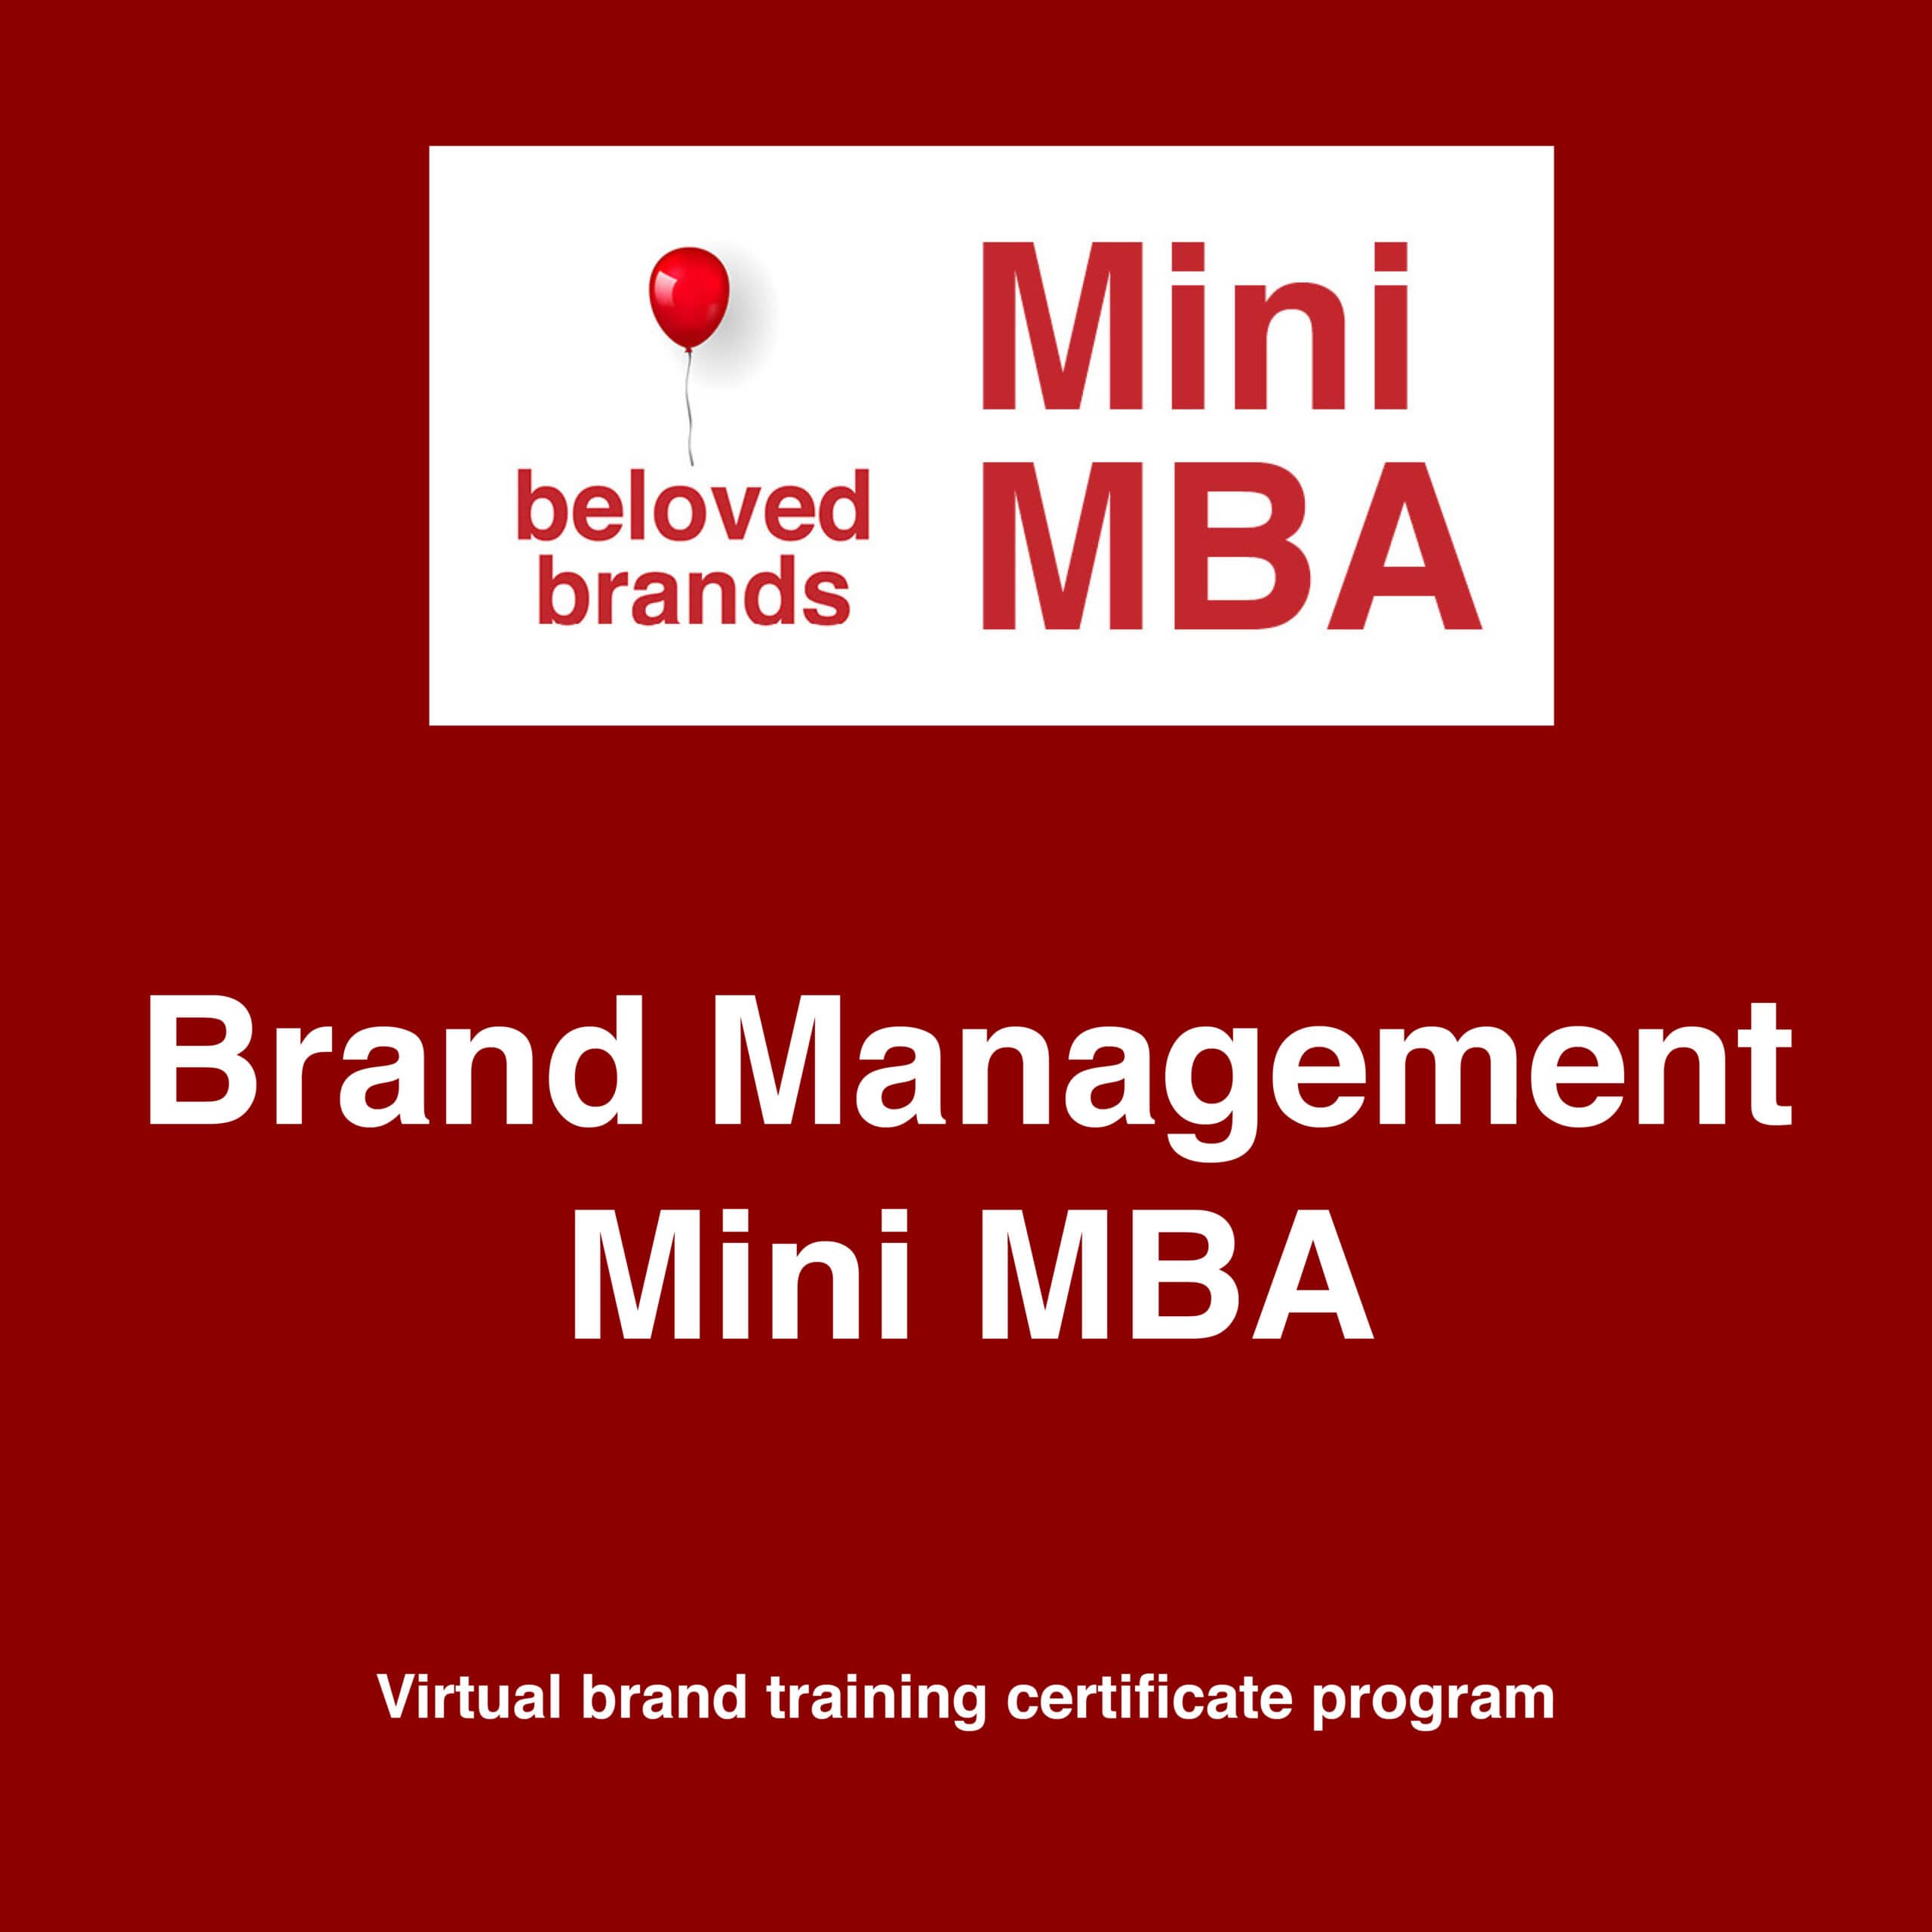 Mini MBA in brand management online marketing course